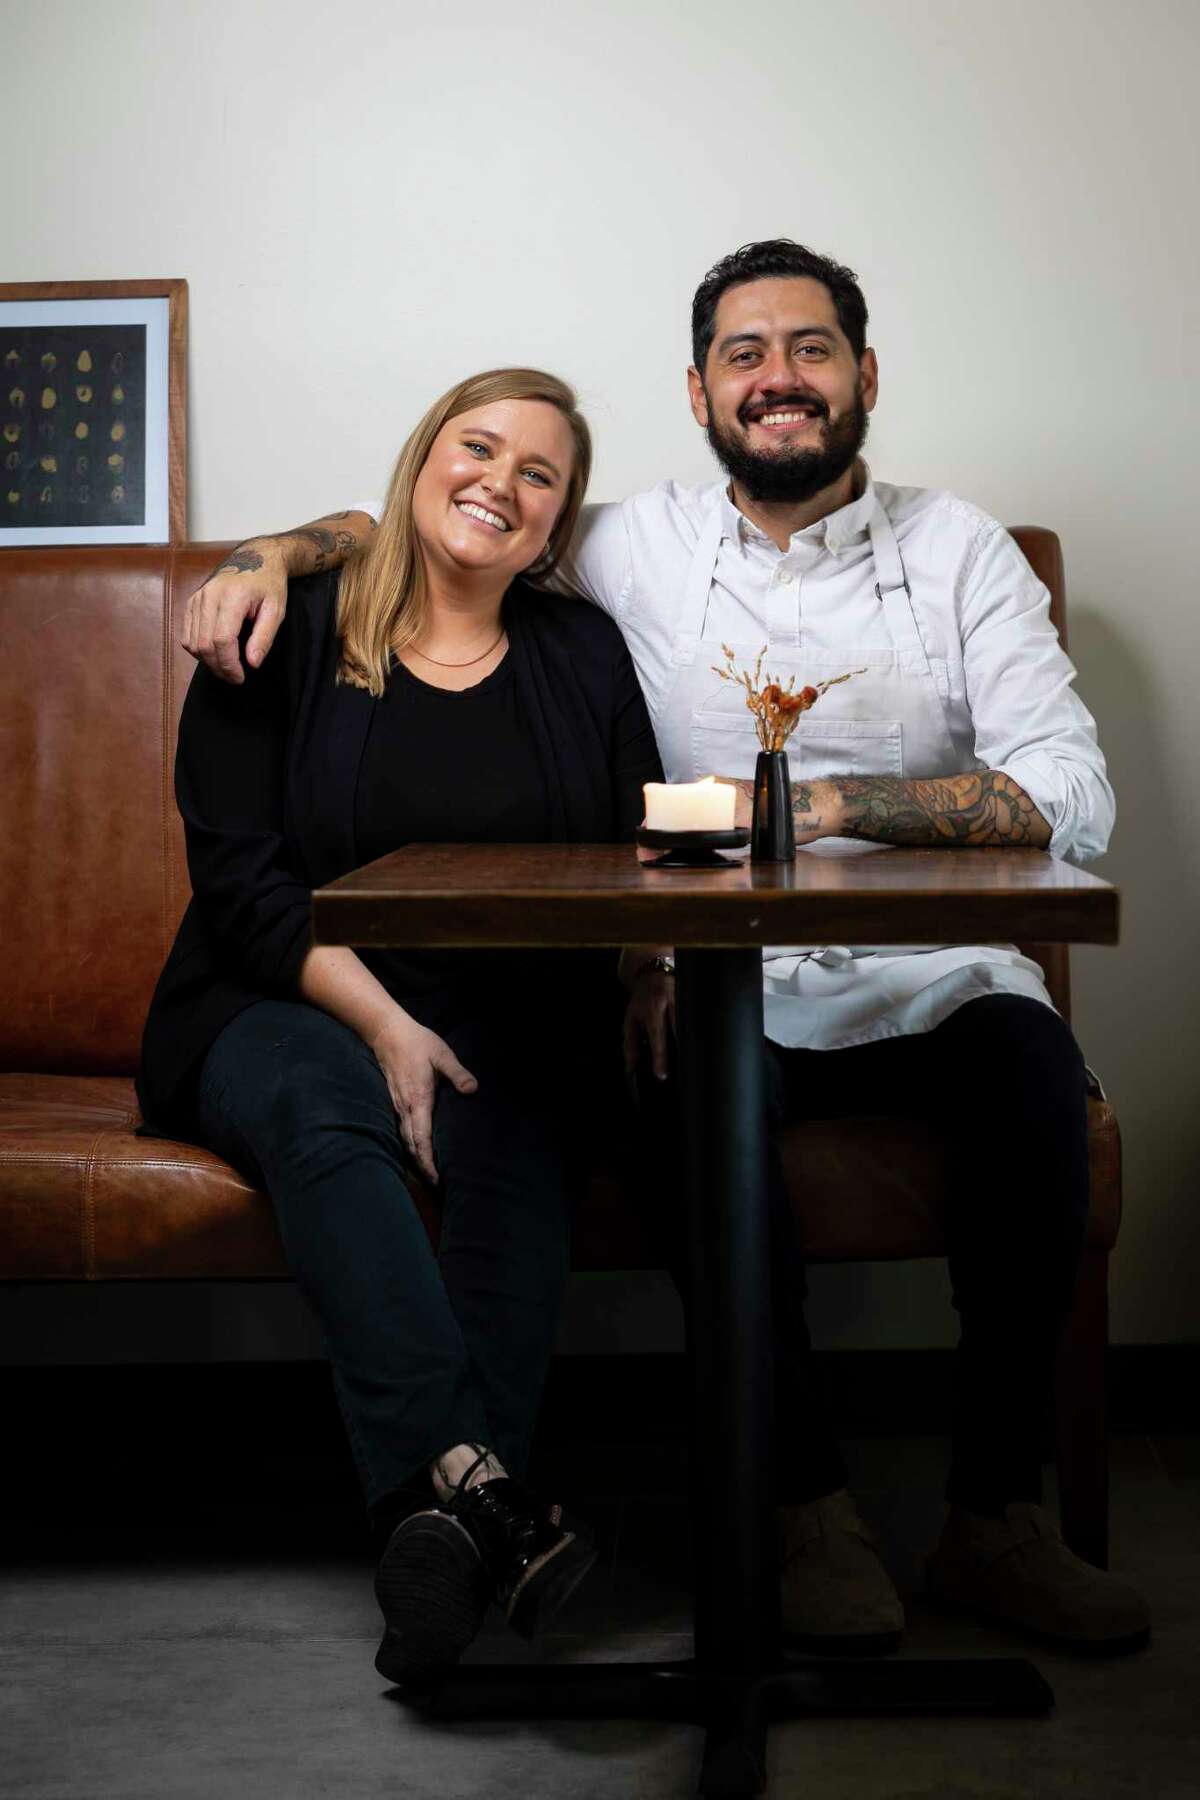 Co-owners Megan Maul and chef Emmanuel Chavez at Tatemó.